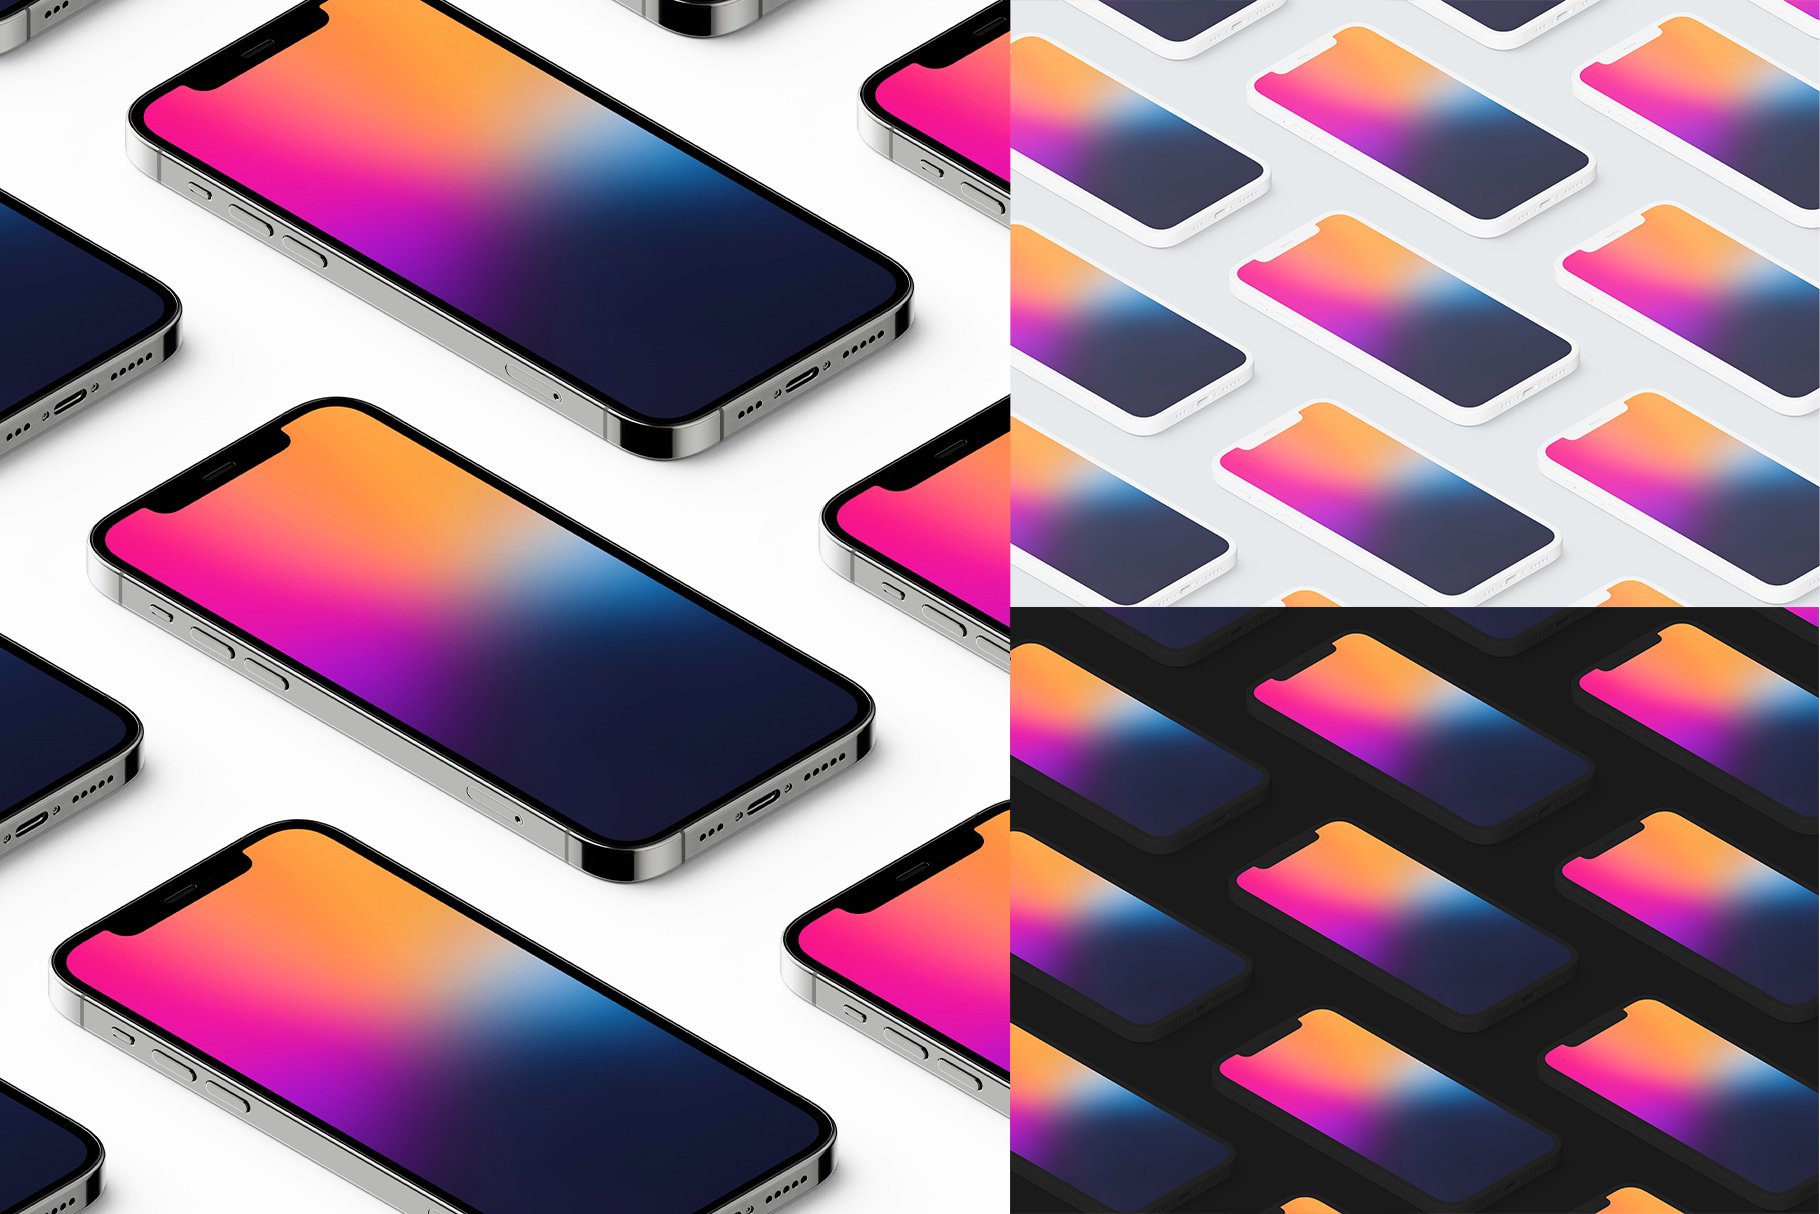 iphone 12 pro mockup pack by anthony boyd graphics 2813c29 543